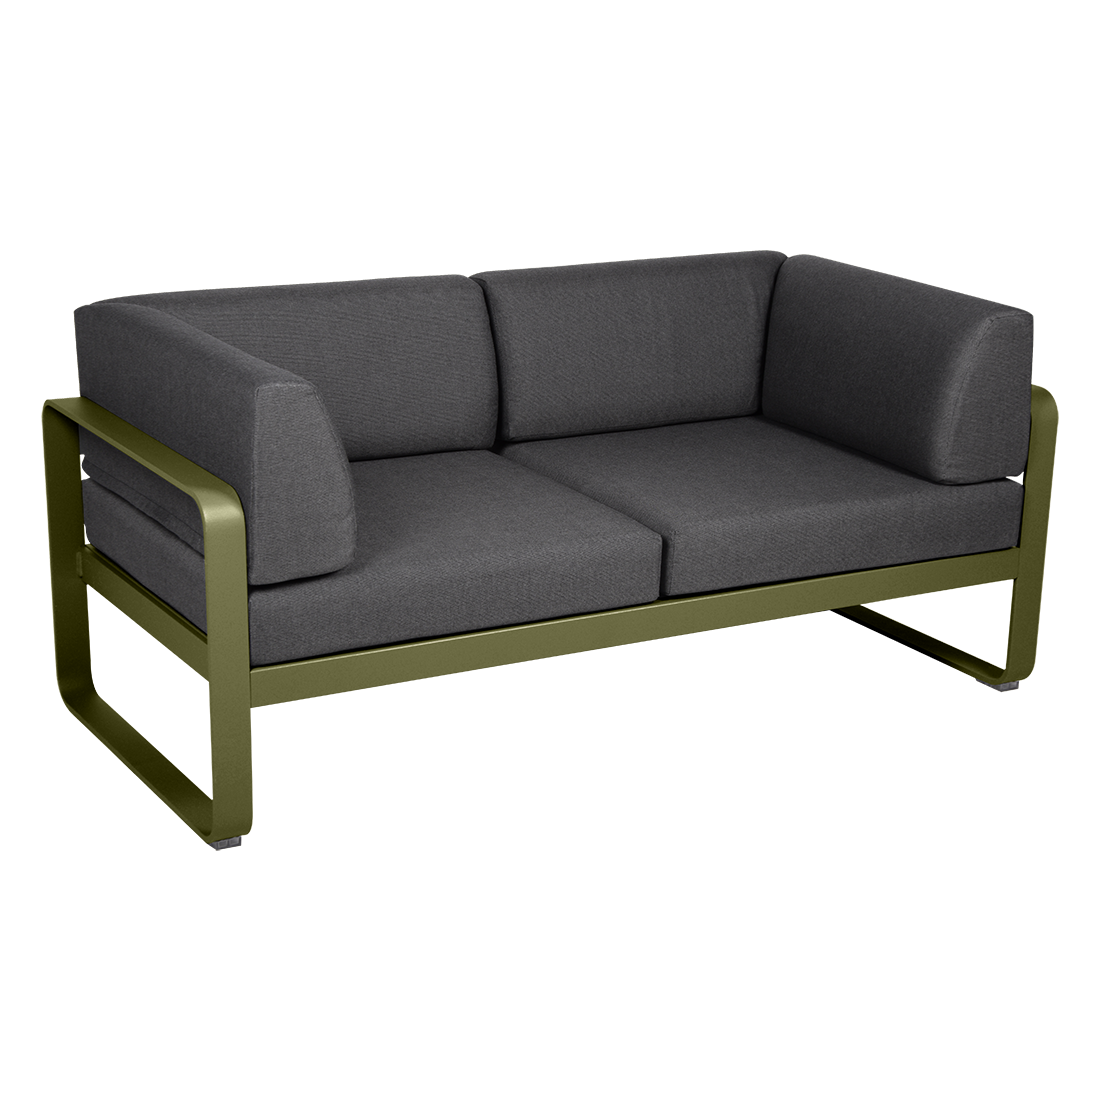 BELLEVIE garden sofa - 2-seater with side cushions